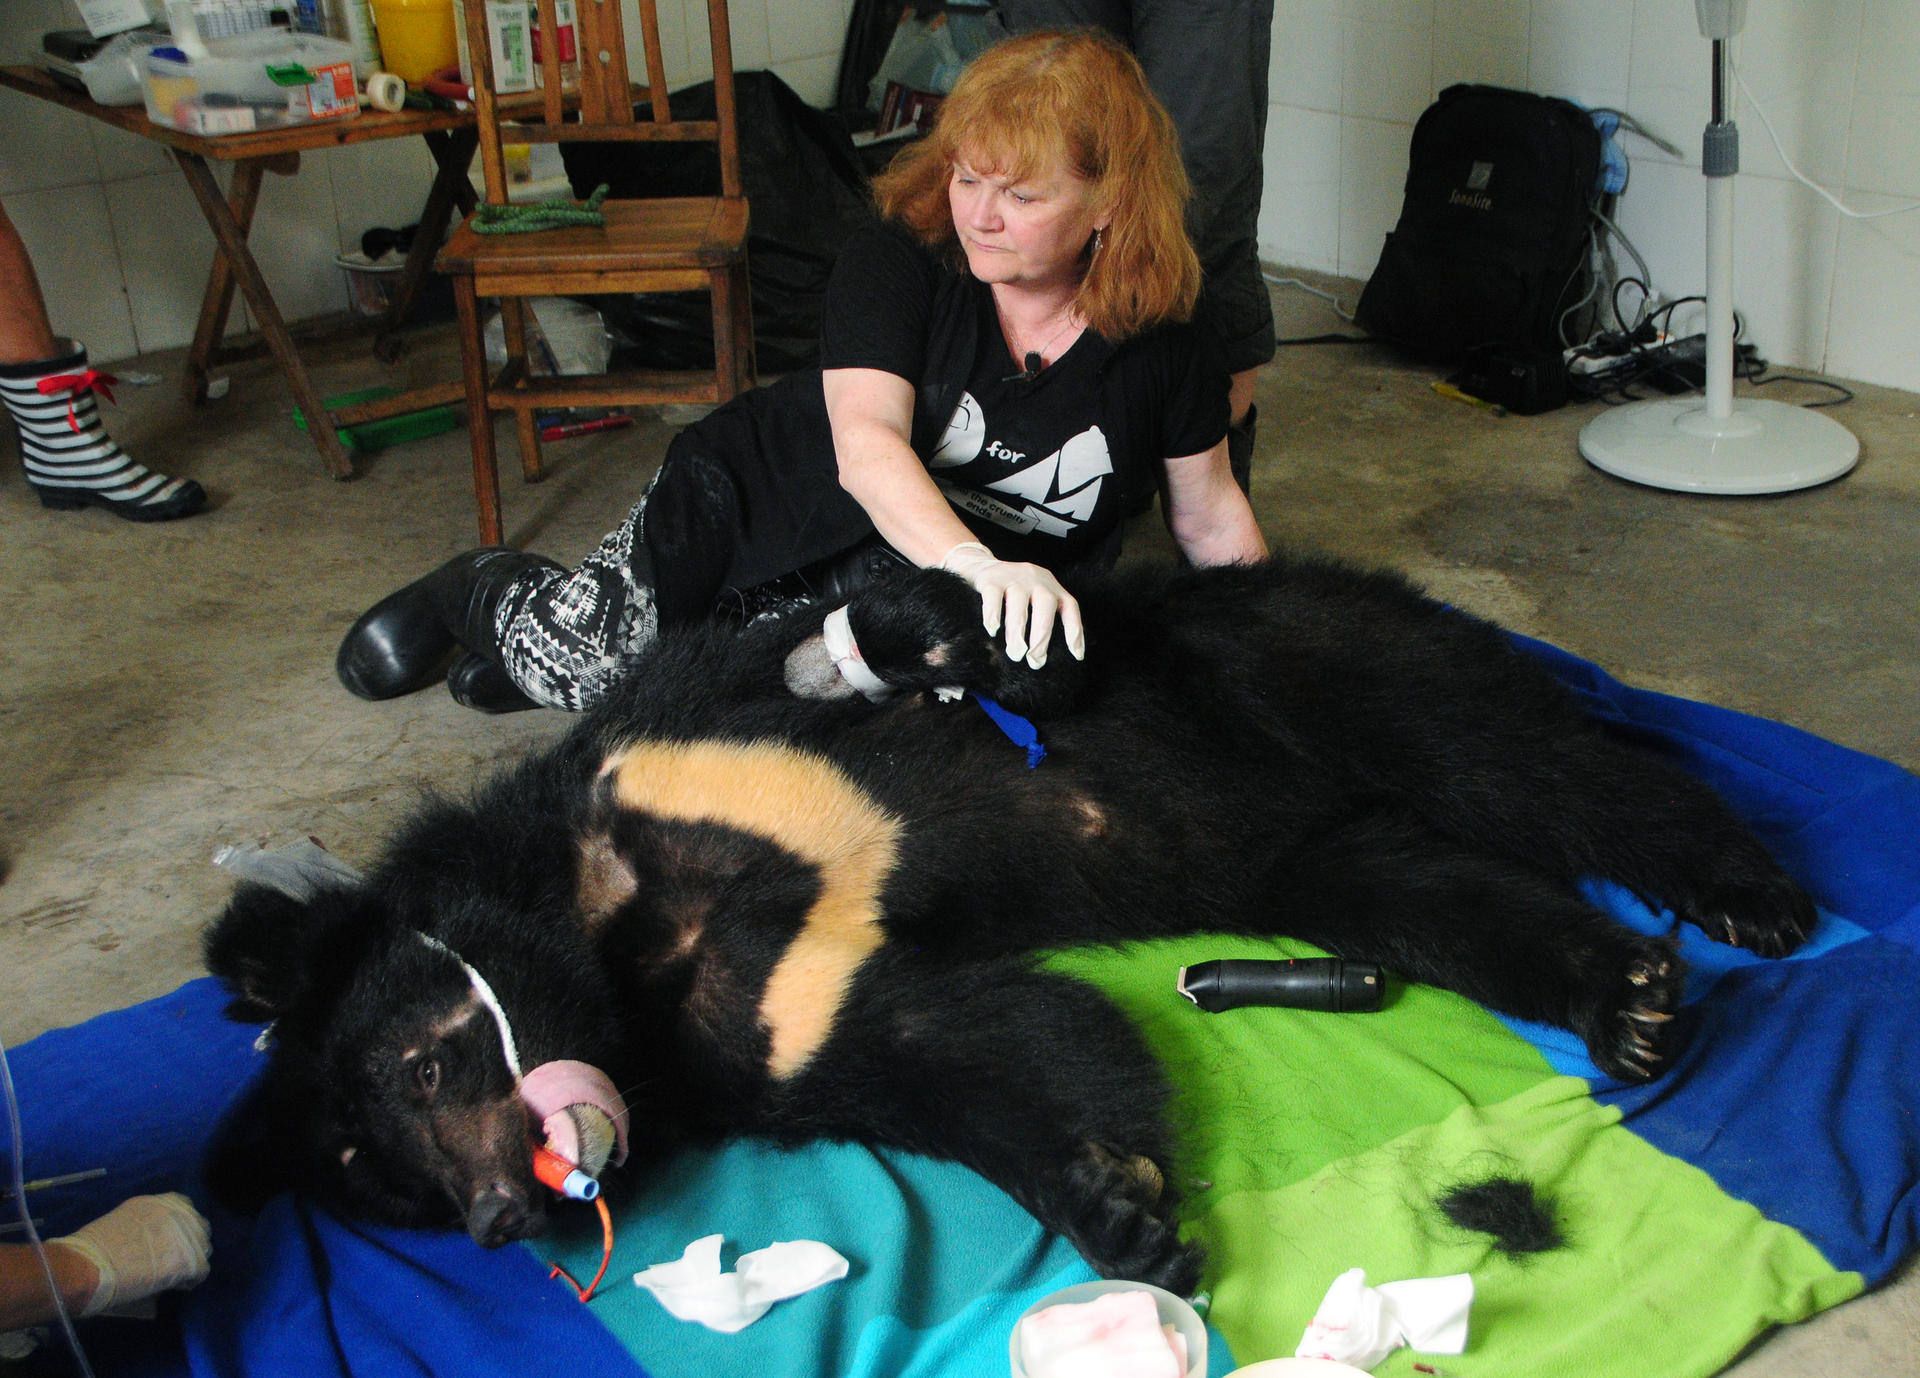 Actress Lesley Nicol helps treat a sick rescued bear in Nanning in June. Photo: SMP